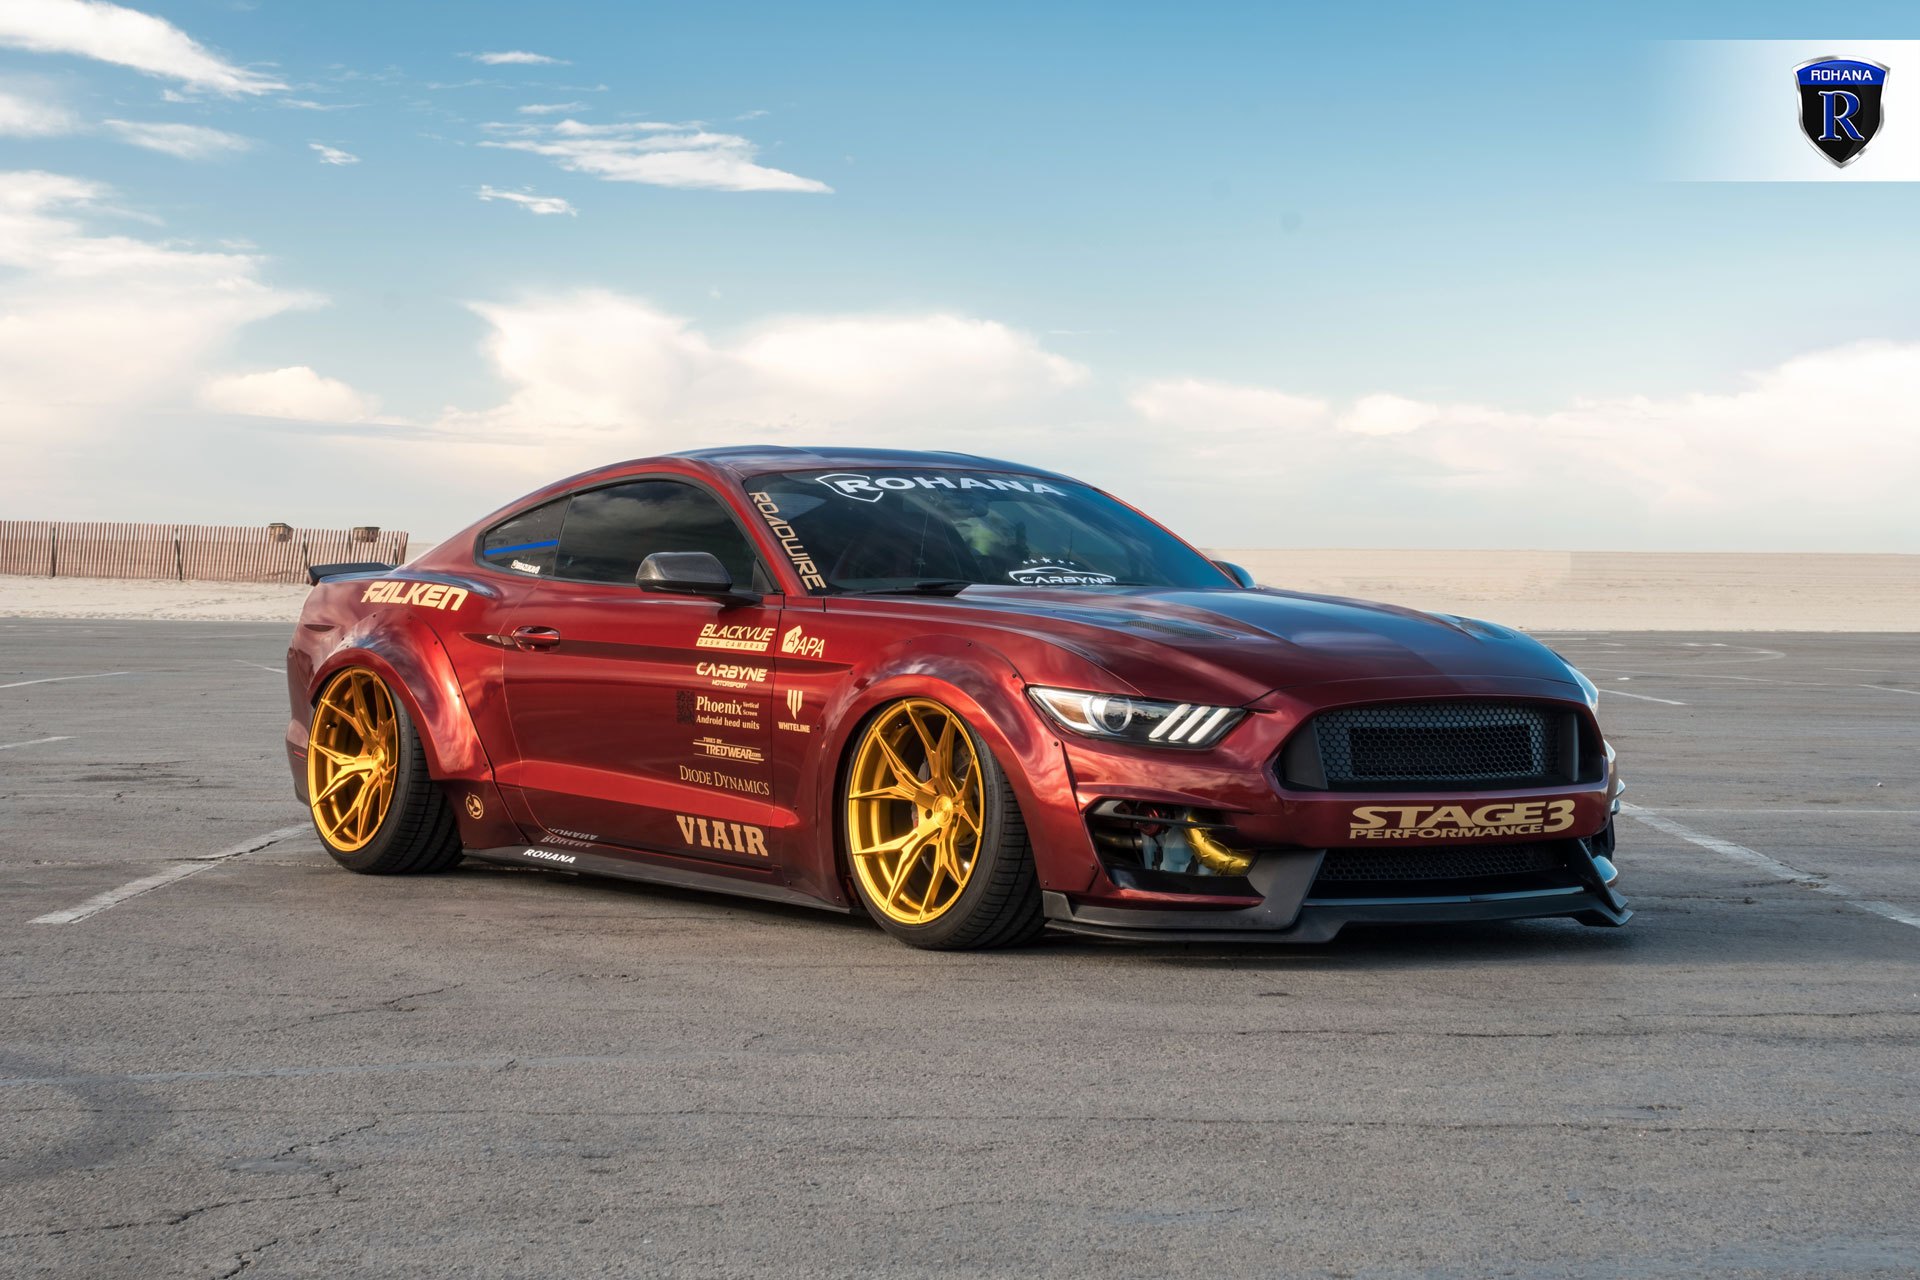 Aftermarket Front Lip on Red Debadged Ford Mustang - Photo by Rohana Wheels